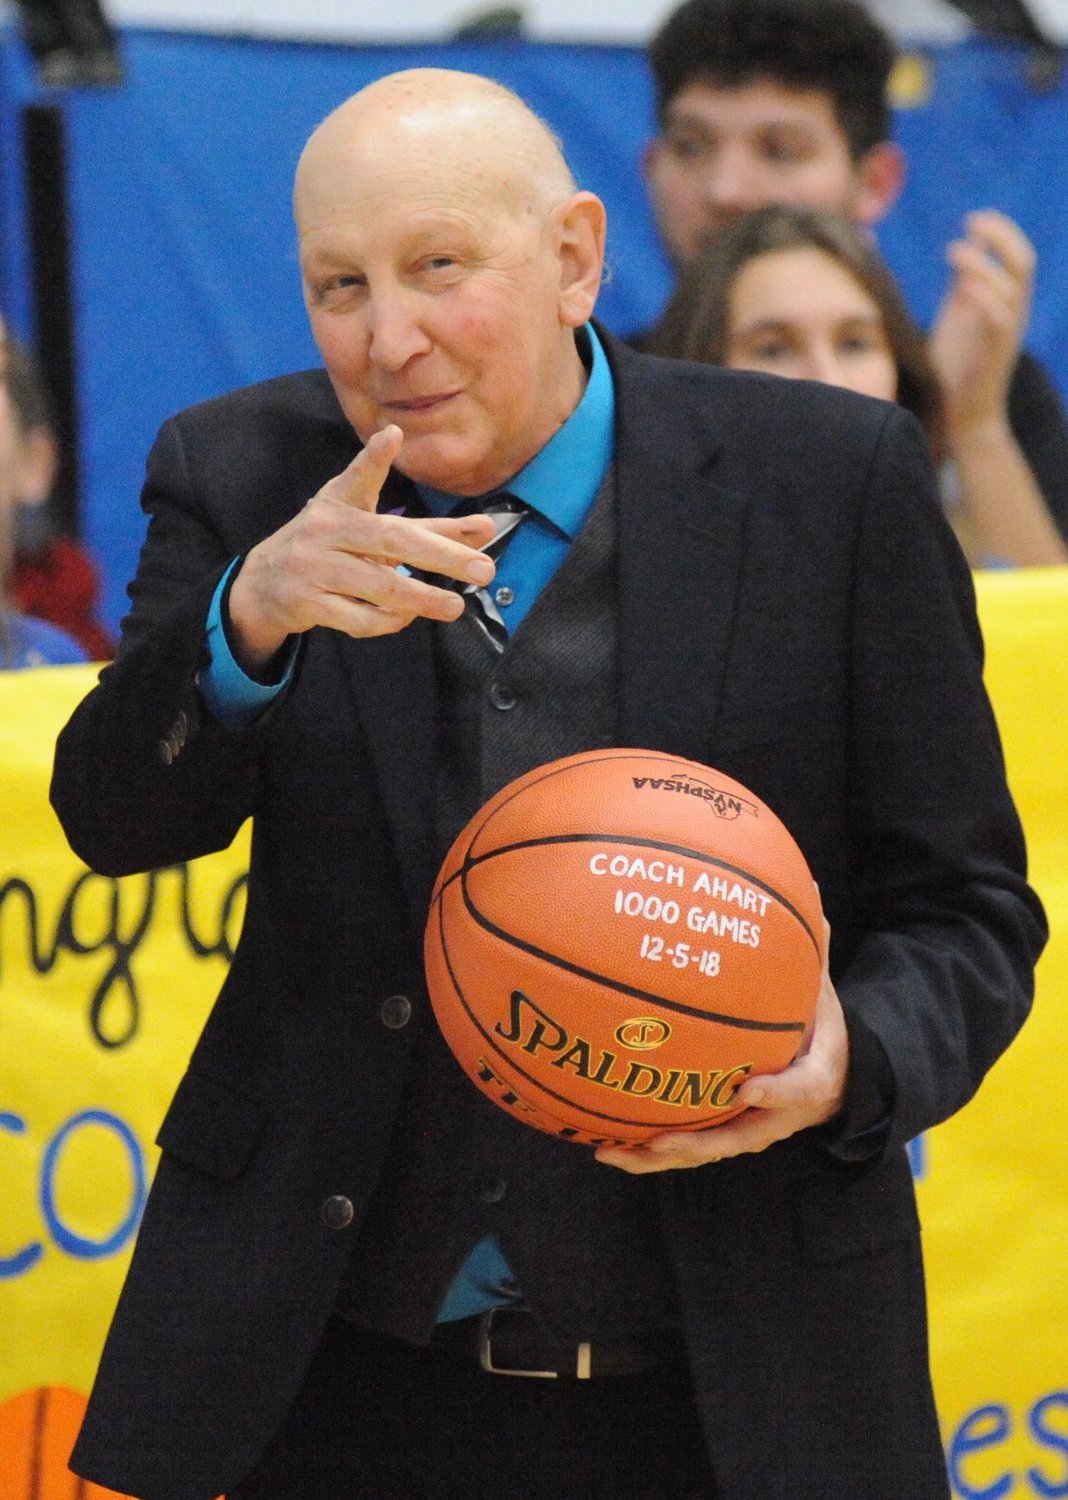 A milestone accomplishment. On December 5, 2018, Fred Ahart posted his 1,000th game as Roscoe’s boys’ basketball coach in the gym named in his honor. The Blue Devils edged Seward 54-52, in a matchup that saw Ahart’s friend and coach Rob Gravelle post his 500th game as helmsman of the Spartans.